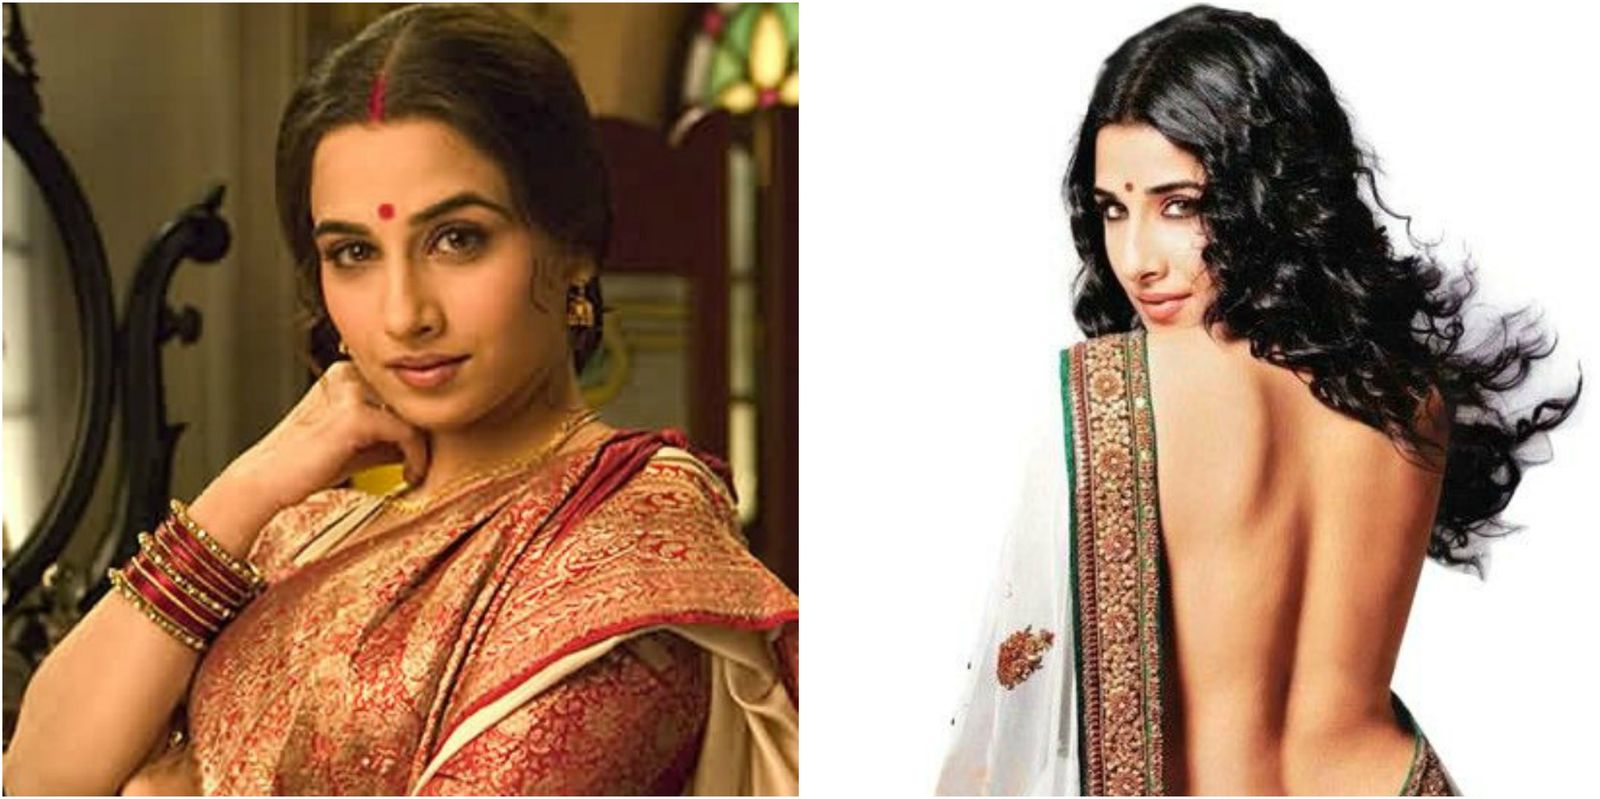 “Women Like It, Want It, Need It As Much As Men Do”, Thank You Vidya Balan For Busting This Myth And Many More